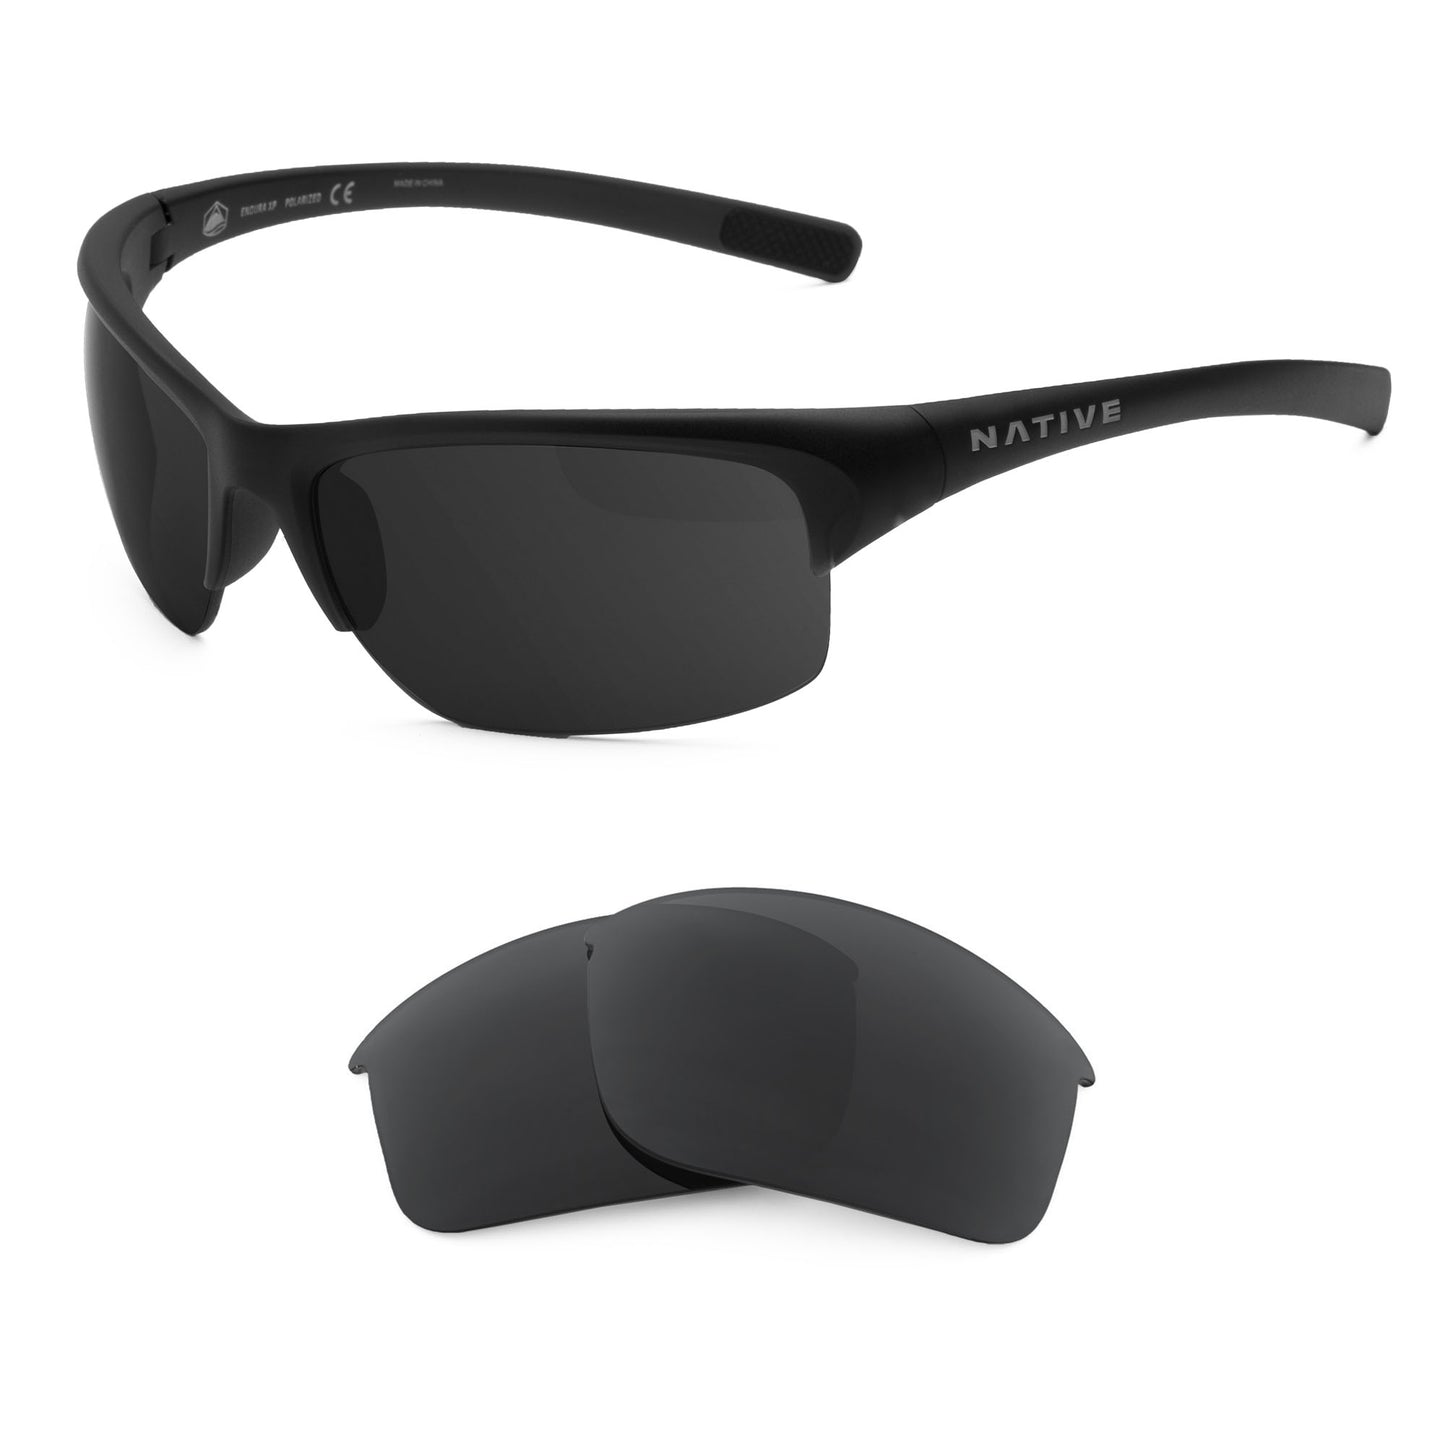 Native Endura XP sunglasses with replacement lenses